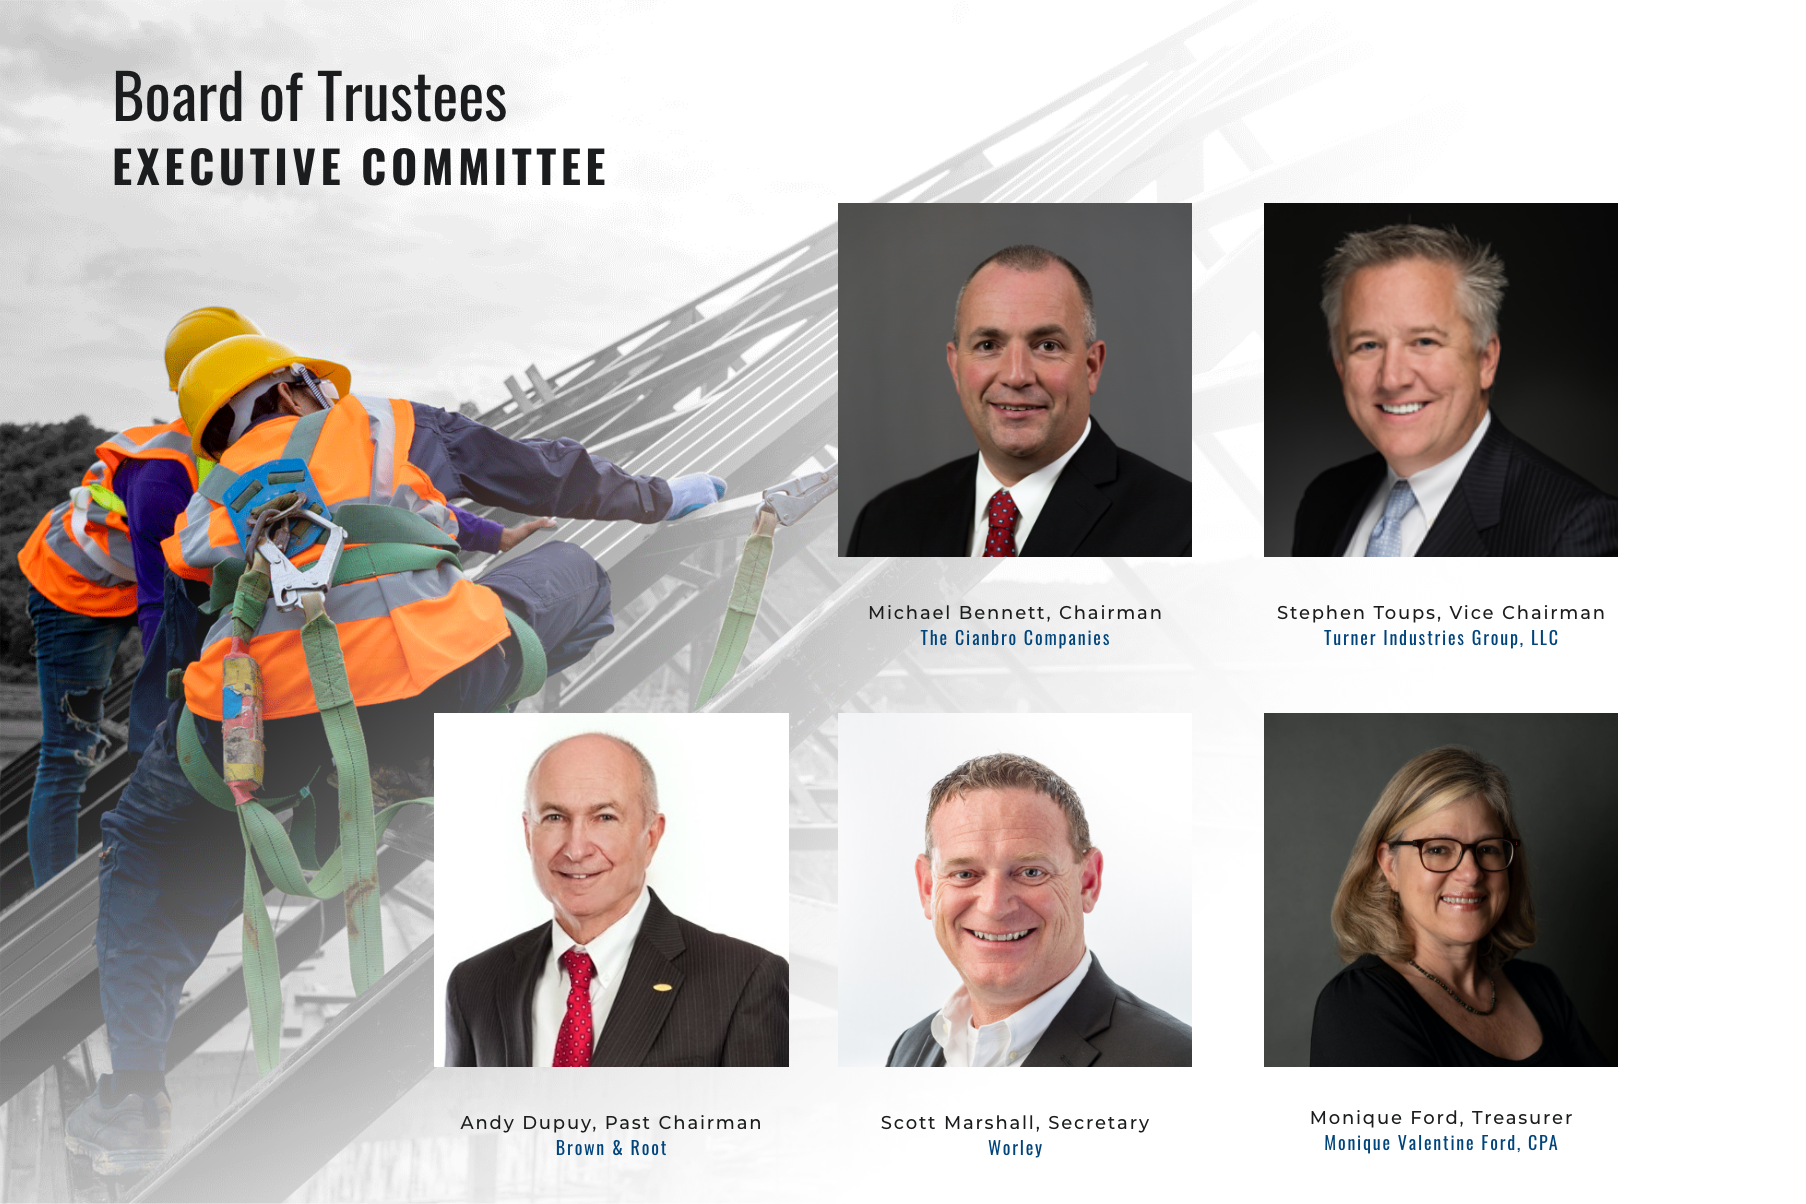 Board of Trustees Executive Committee. Michael Bennett, chairman The Cianbro Companies Stephen Toups, vice chairman Turner Industries Group, LLC Andy Dupuy, past chairman Brown & Root Scott Marshall, secretary Worley Monique Ford, treasurer Monique Valentine Ford, CPA